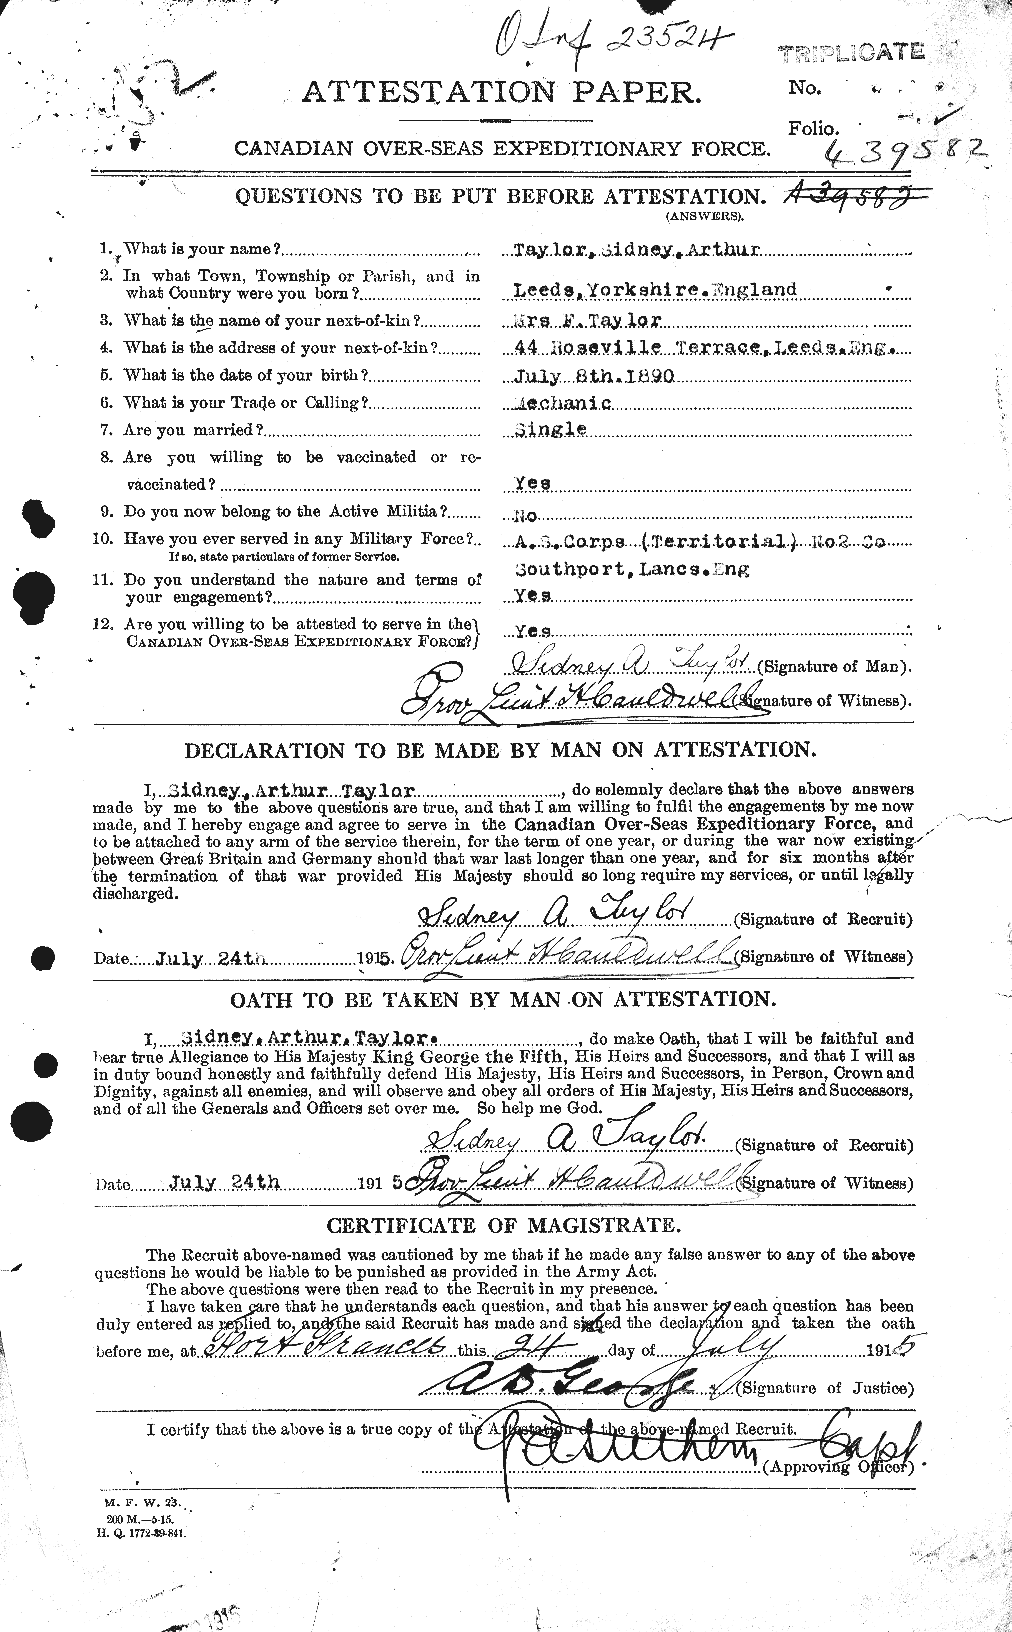 Personnel Records of the First World War - CEF 627895a